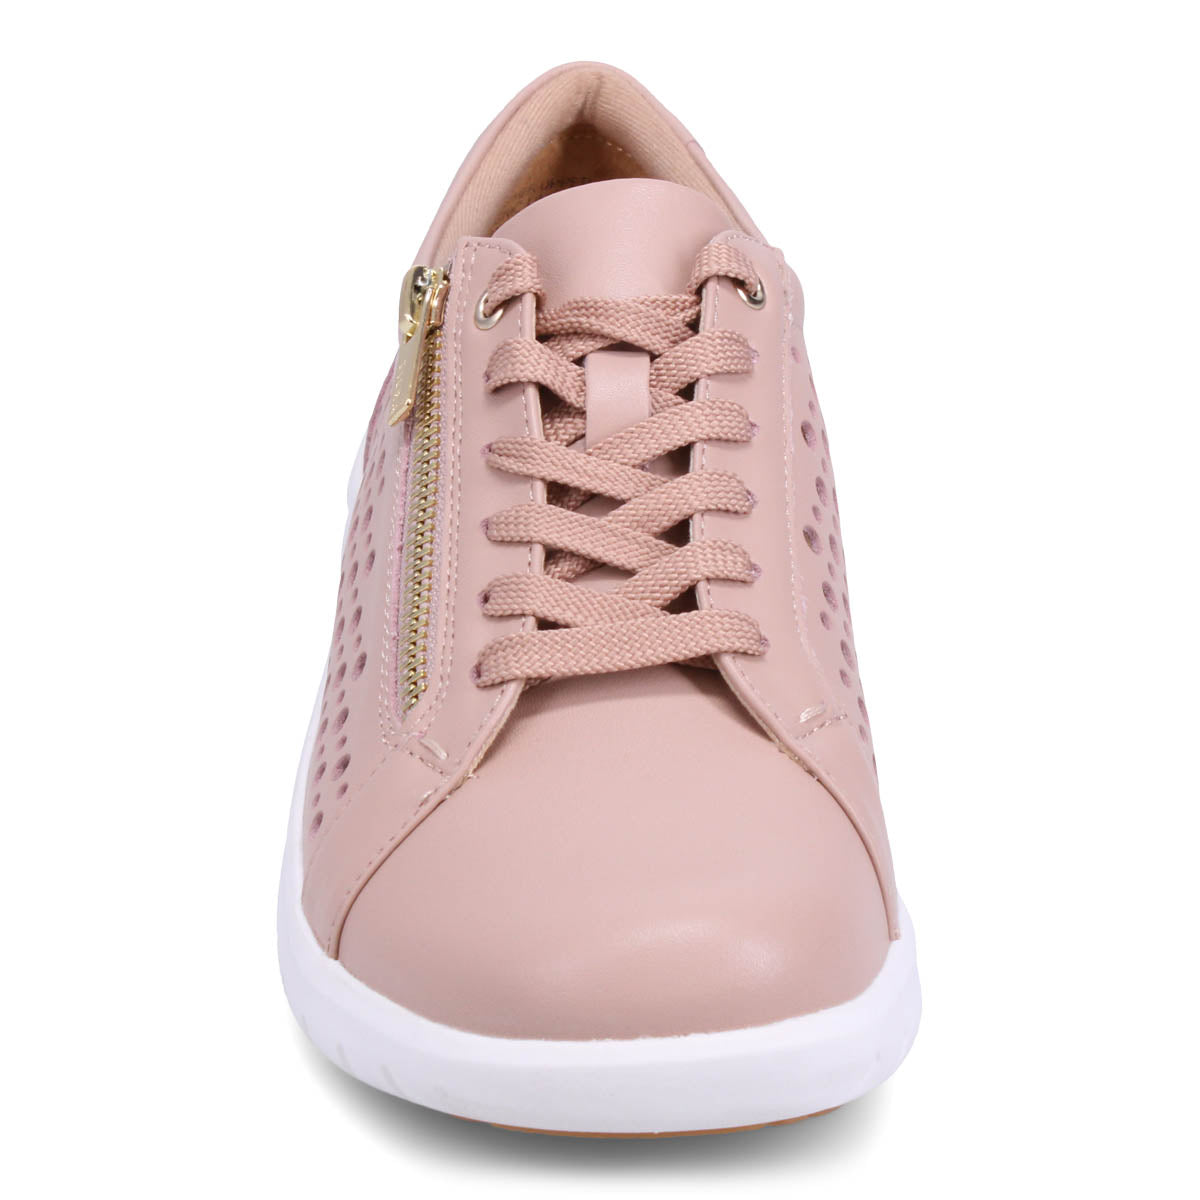 BLUSH LEATHER | Front